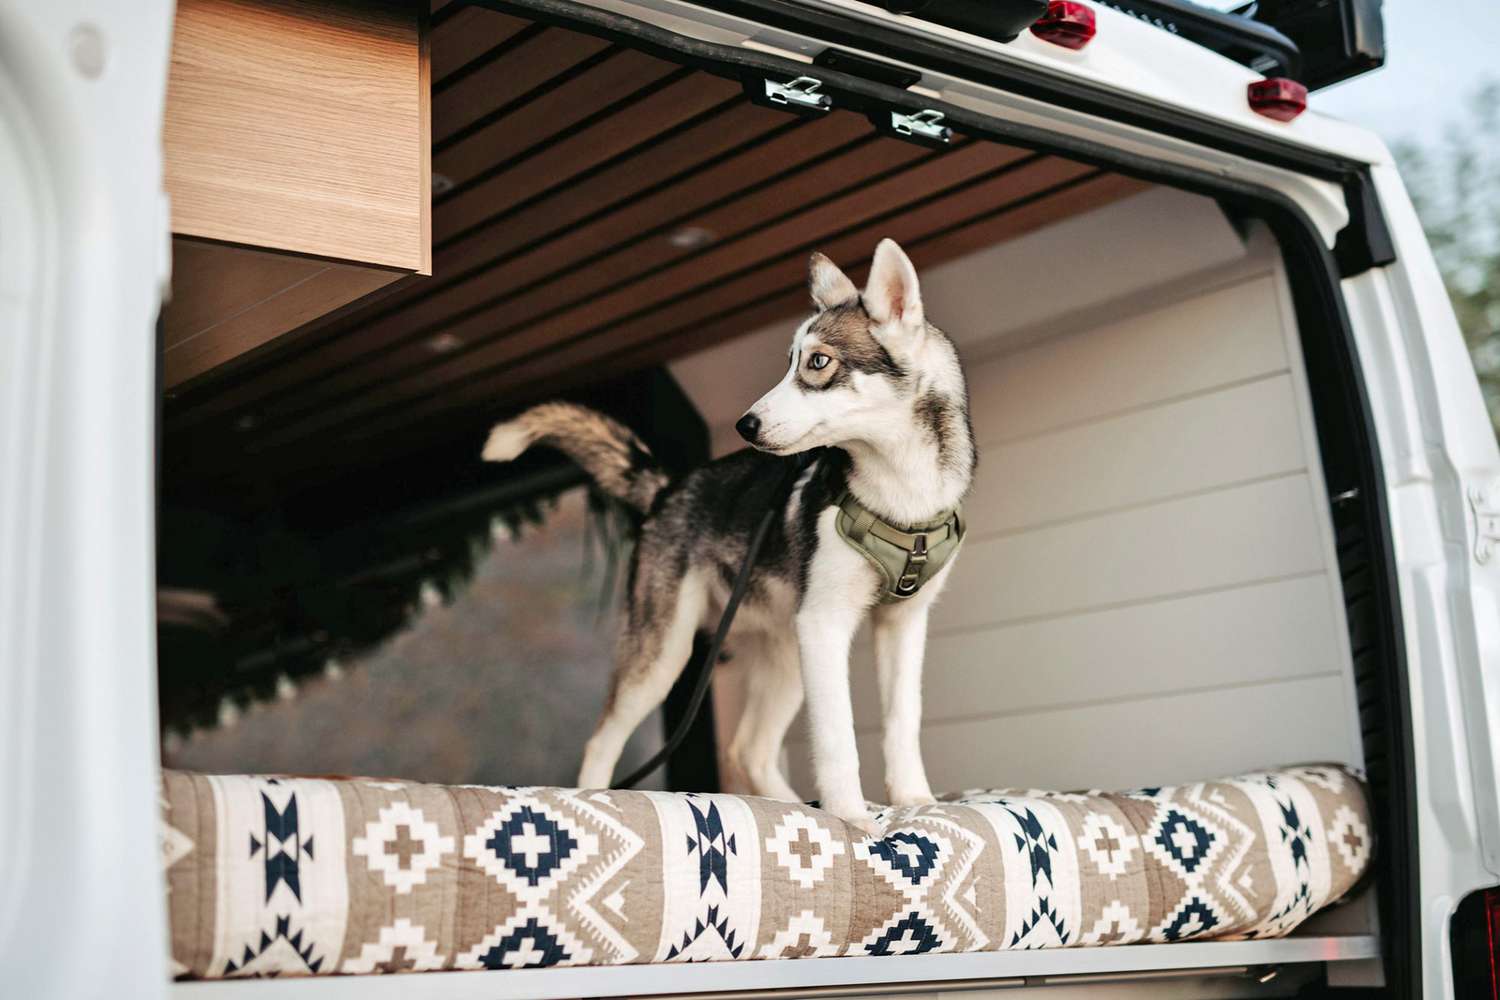 husky puppy on a van life adventure in the back of the vehicle standing on a mattress